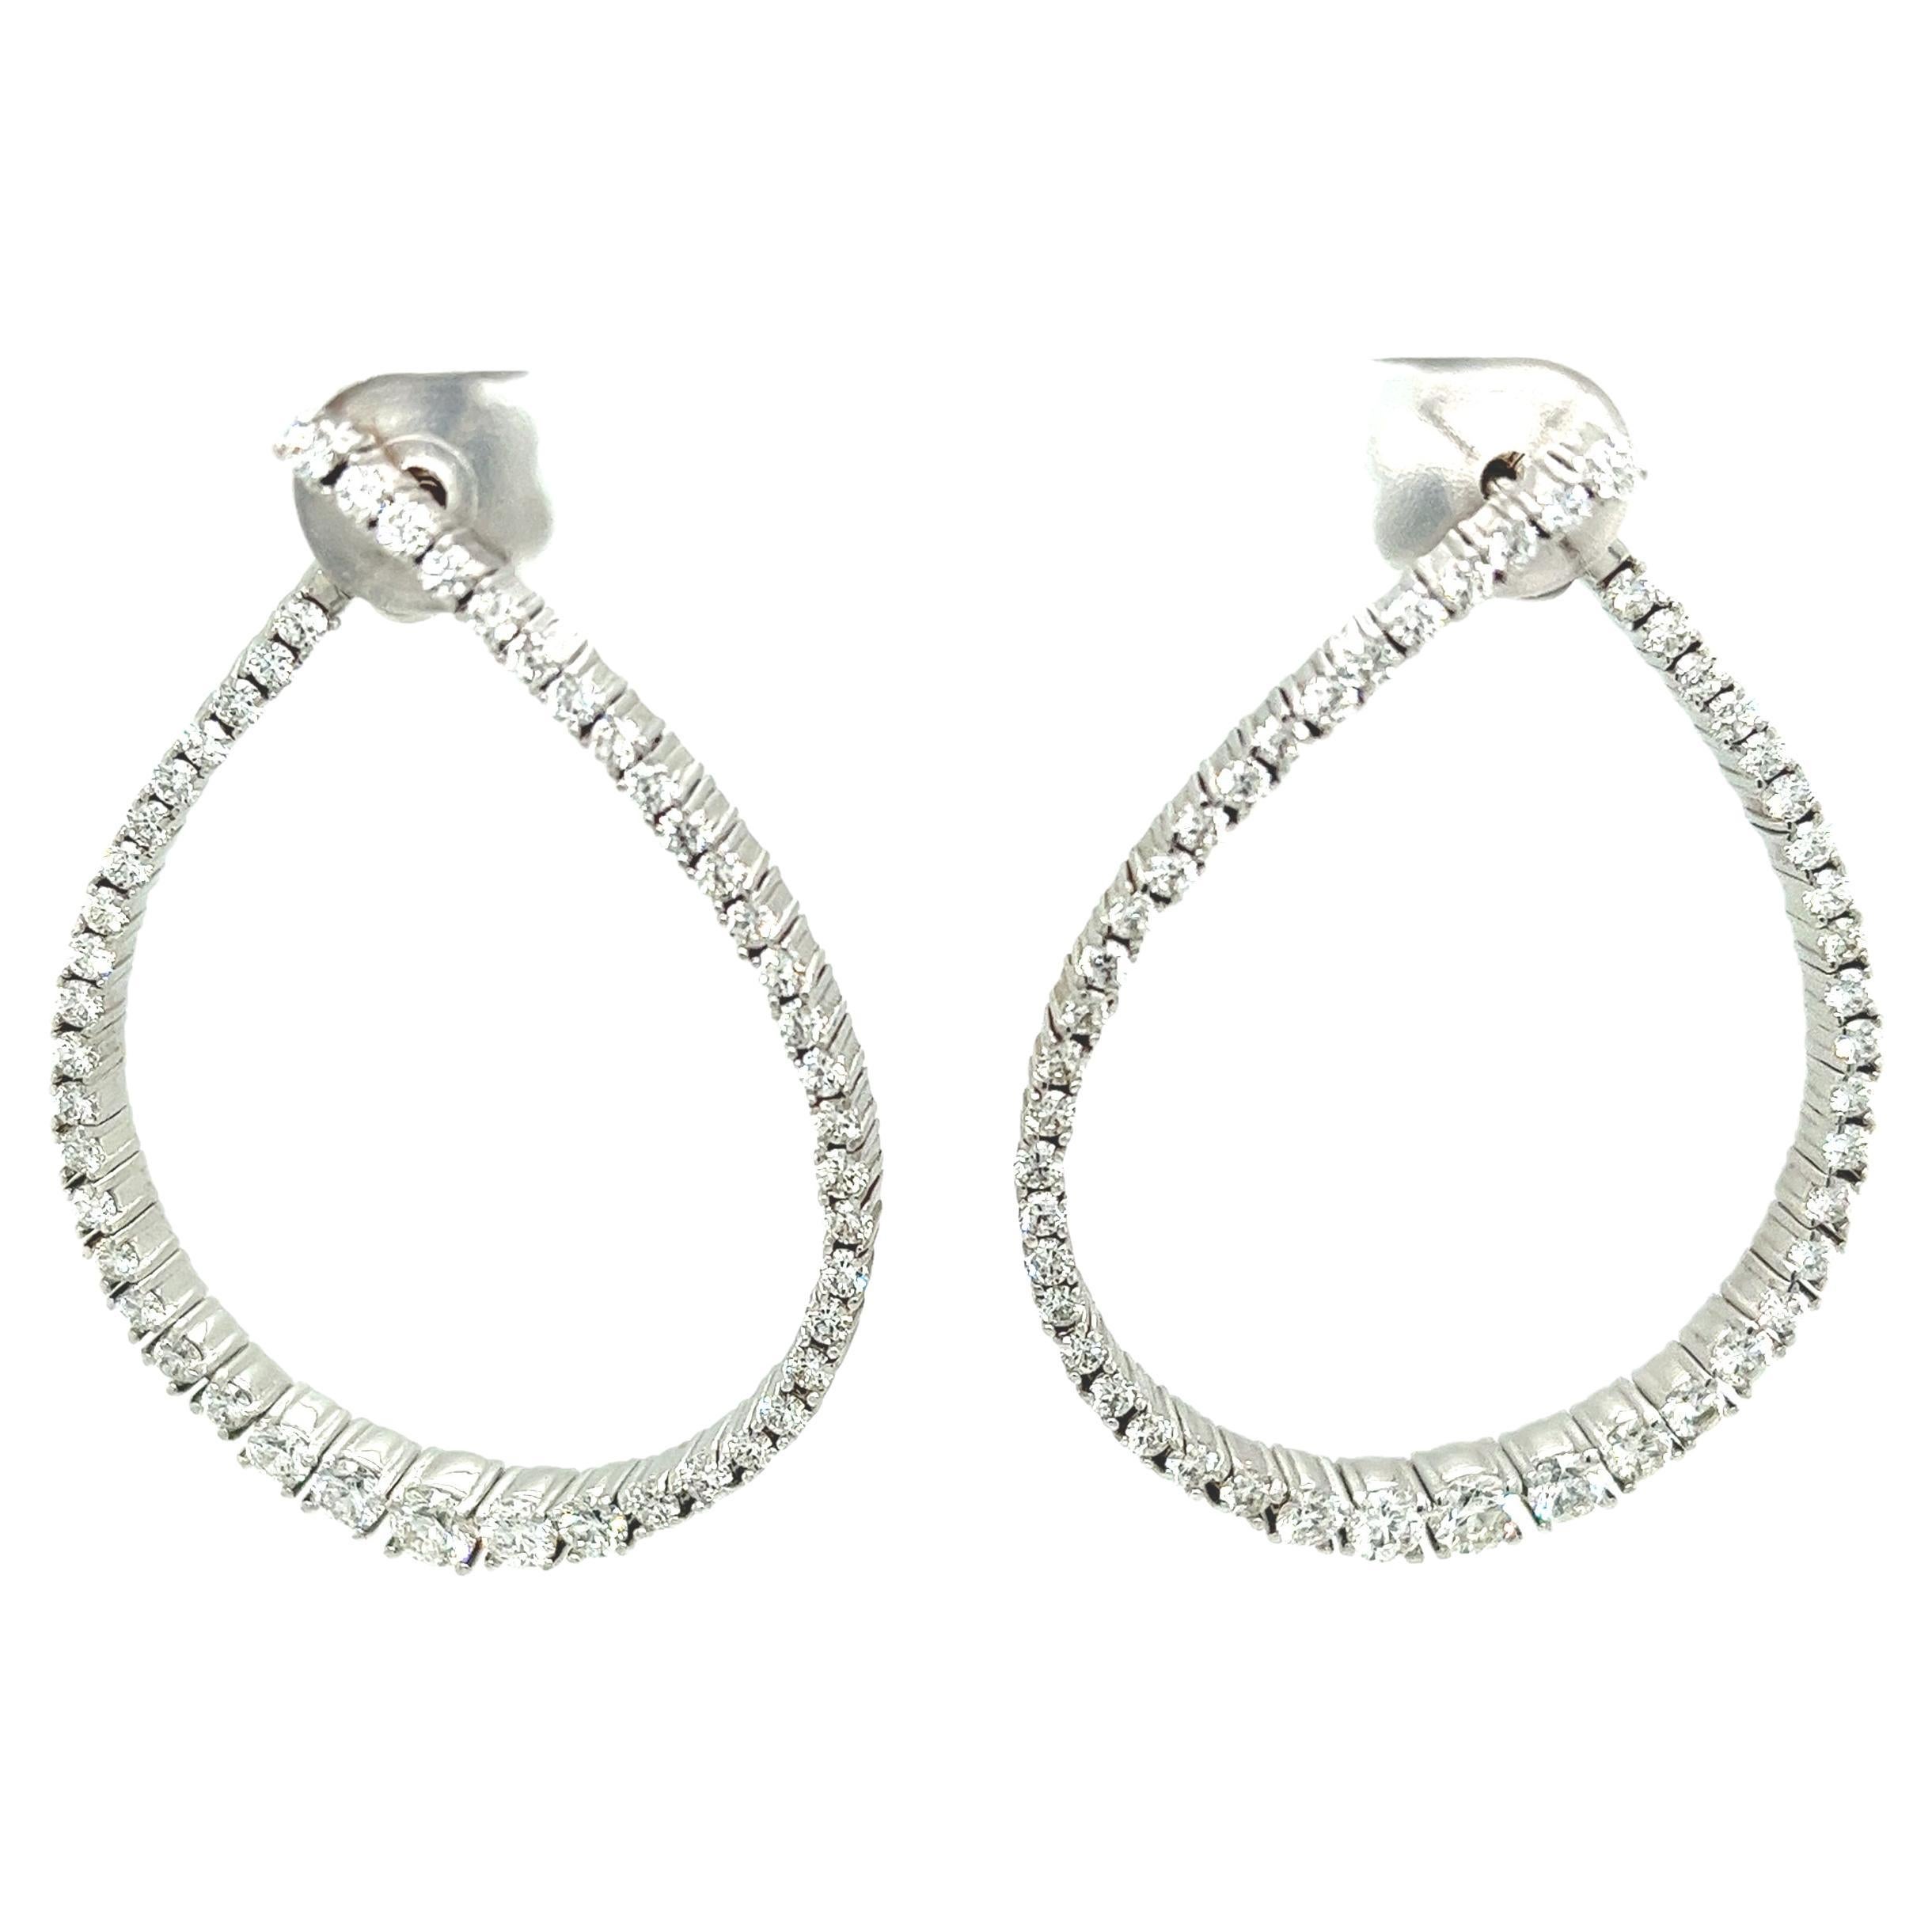 New Fine Quality Hoop Earrings Set with 2.00ct Of Diamonds in 18ct White Gold